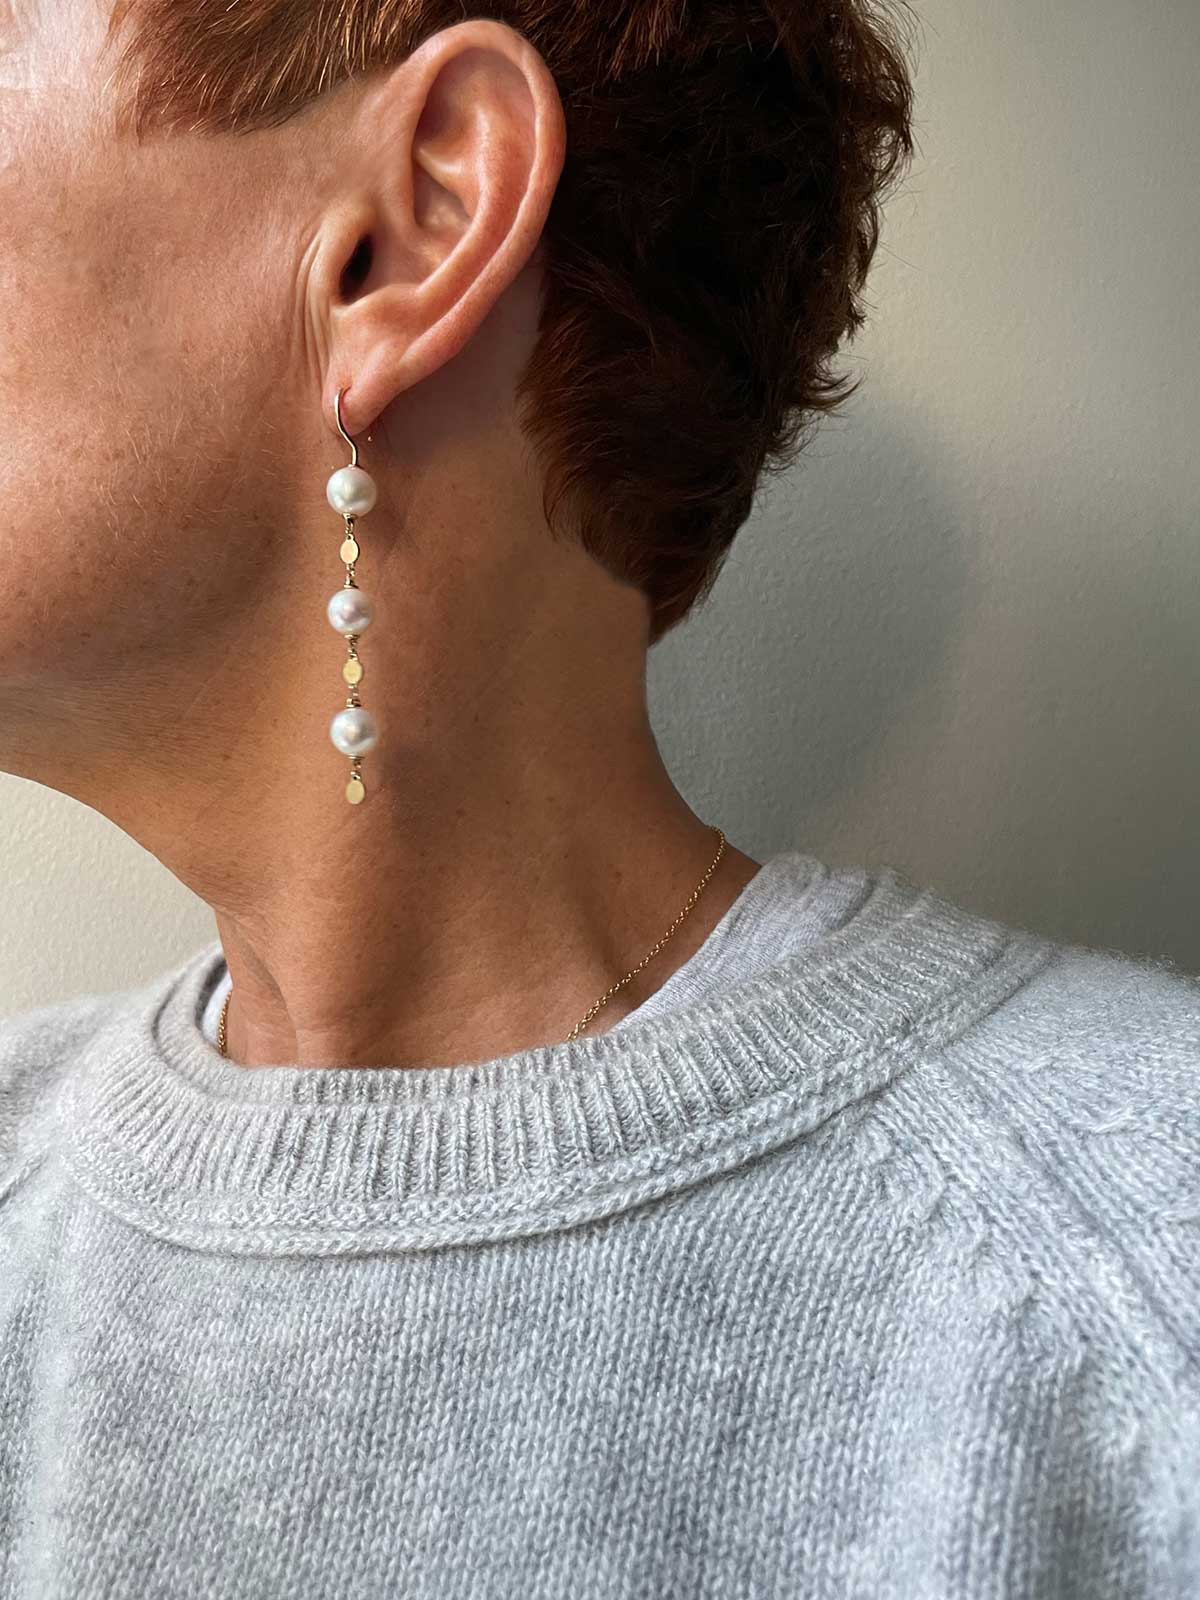 Dazzling Droplets - Earring with pearls